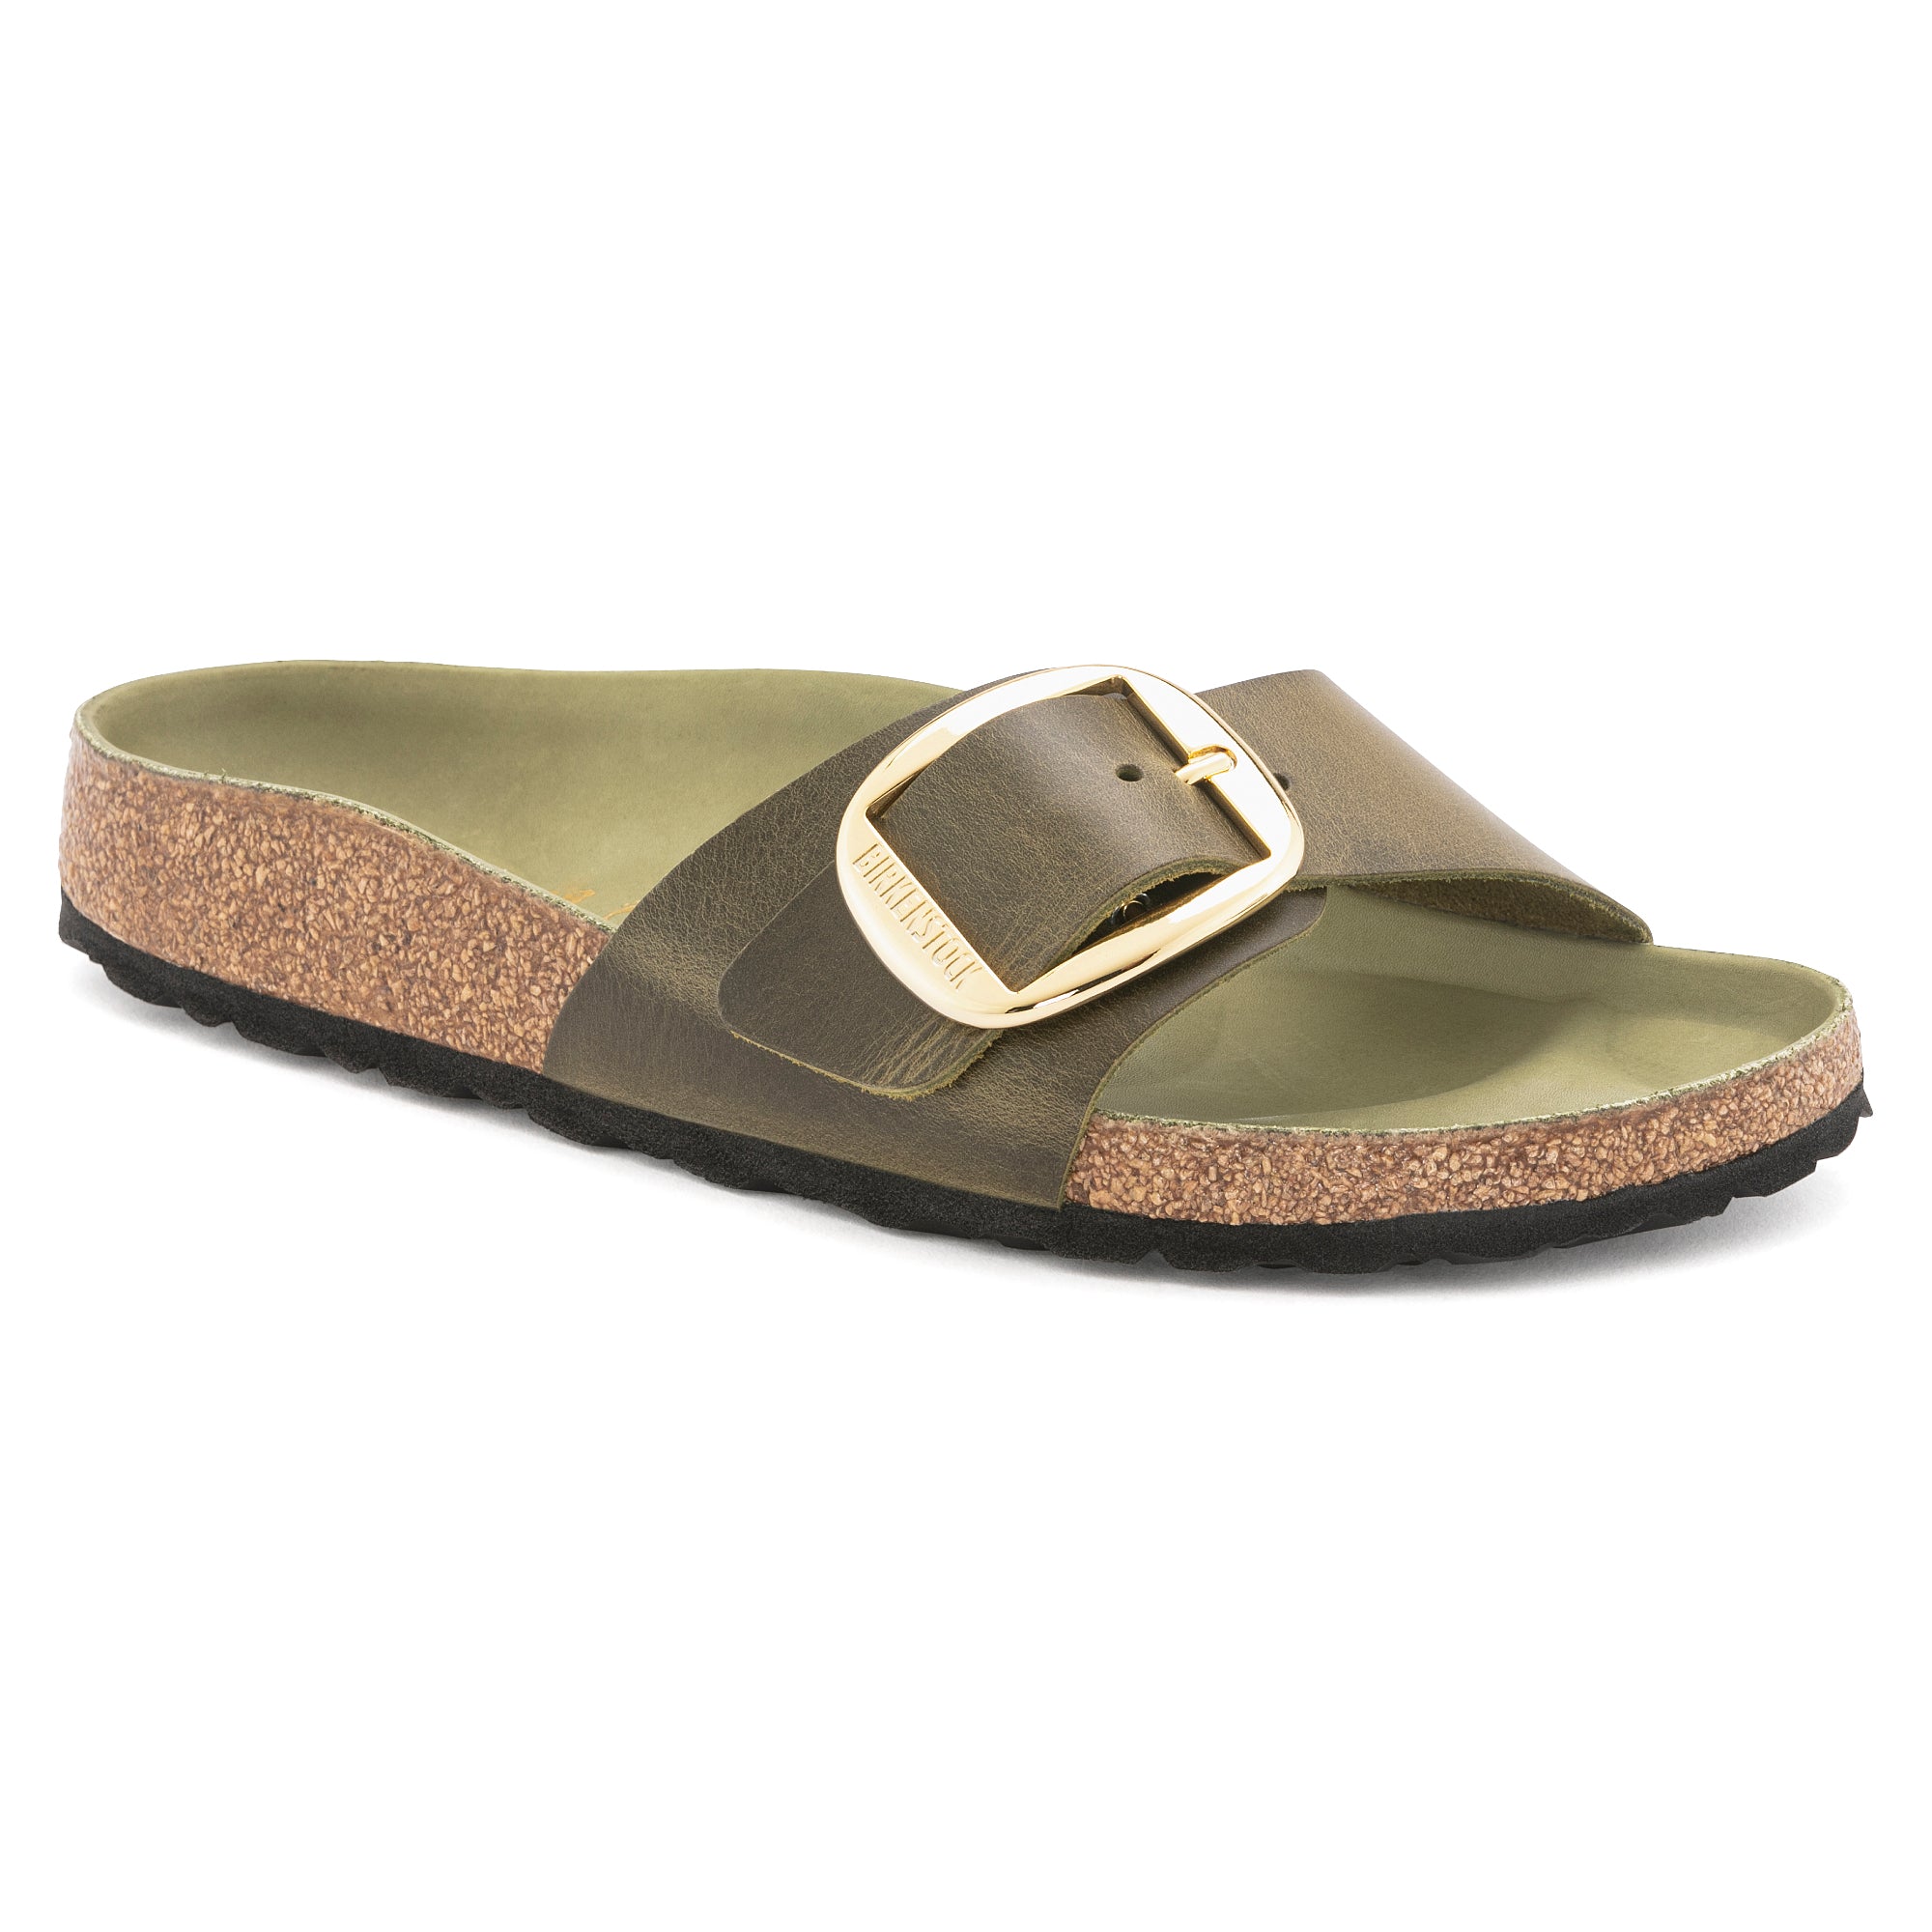 Birkenstock Limited Edition Madrid Big Buckle green olive oiled leather